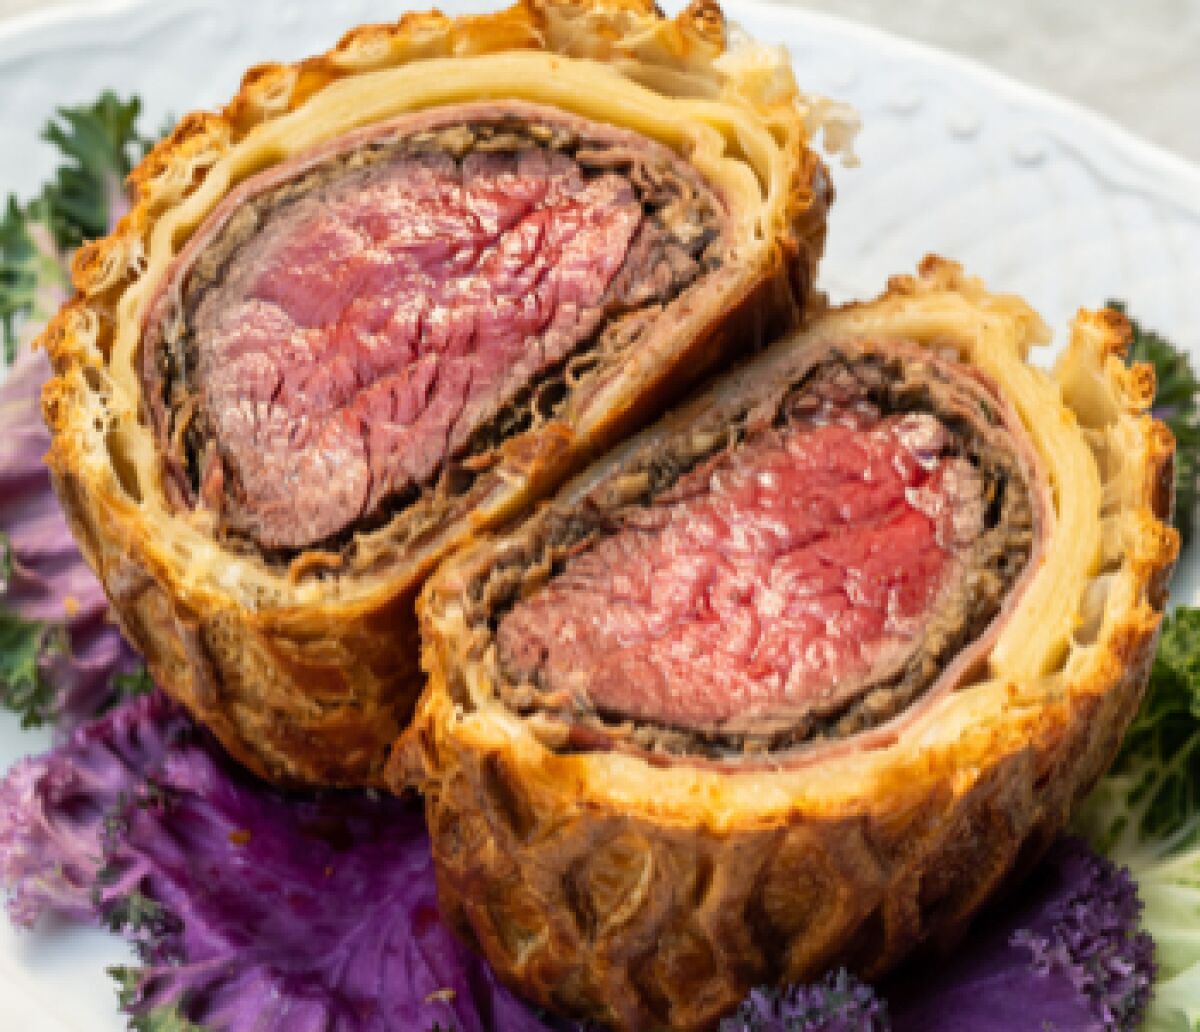 Herb & Wood's Valentine's Day meal  includes beef Wellington.